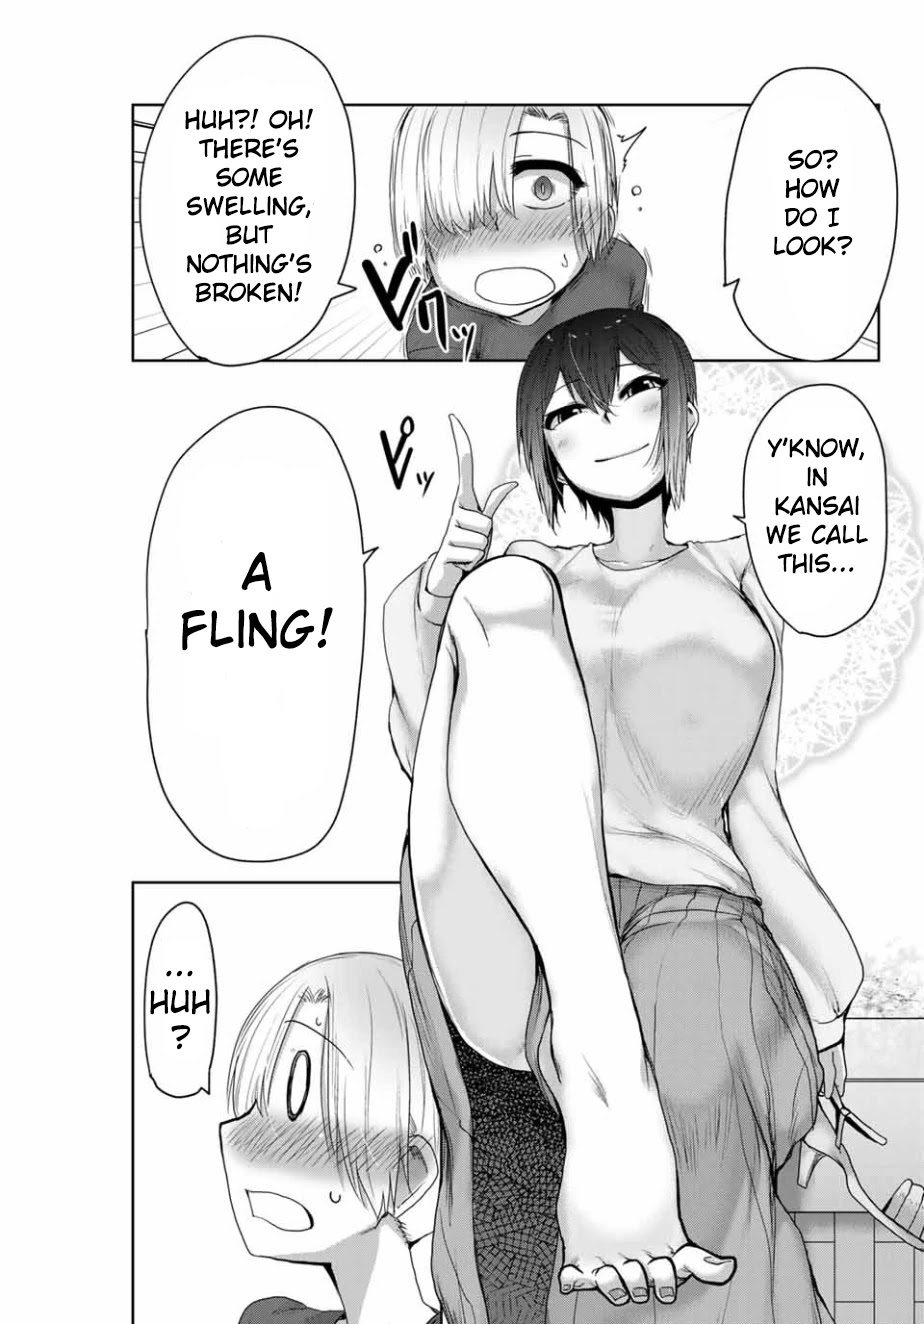 The Girl with a Kansai Accent and the Pure Boy - Chapter 13 Page 7